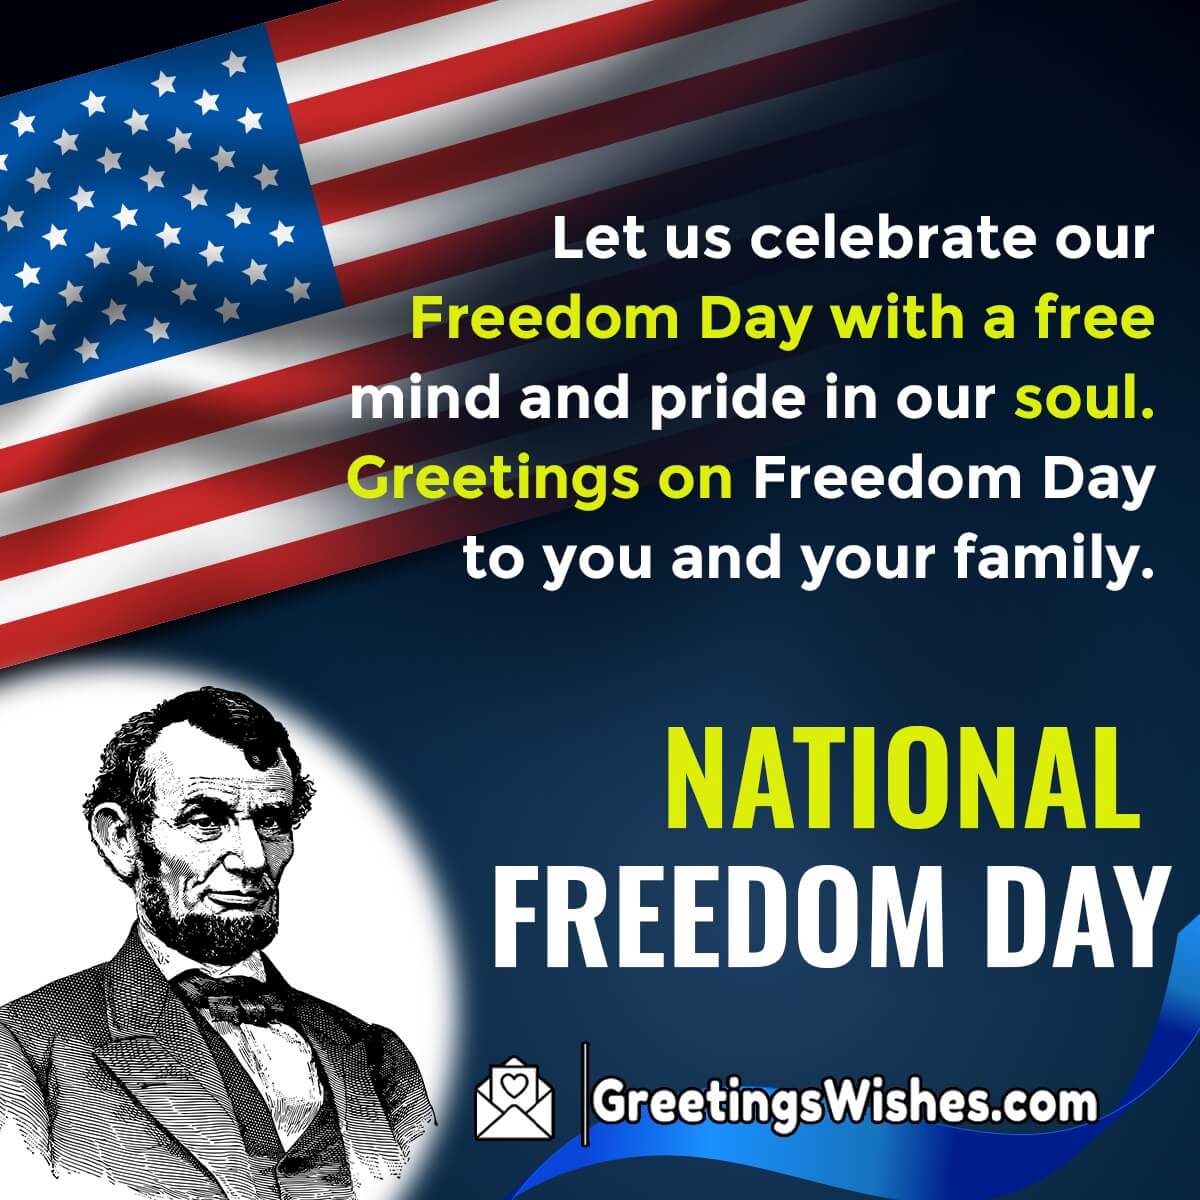 national-freedom-day-wishes-1-february-greetings-wishes